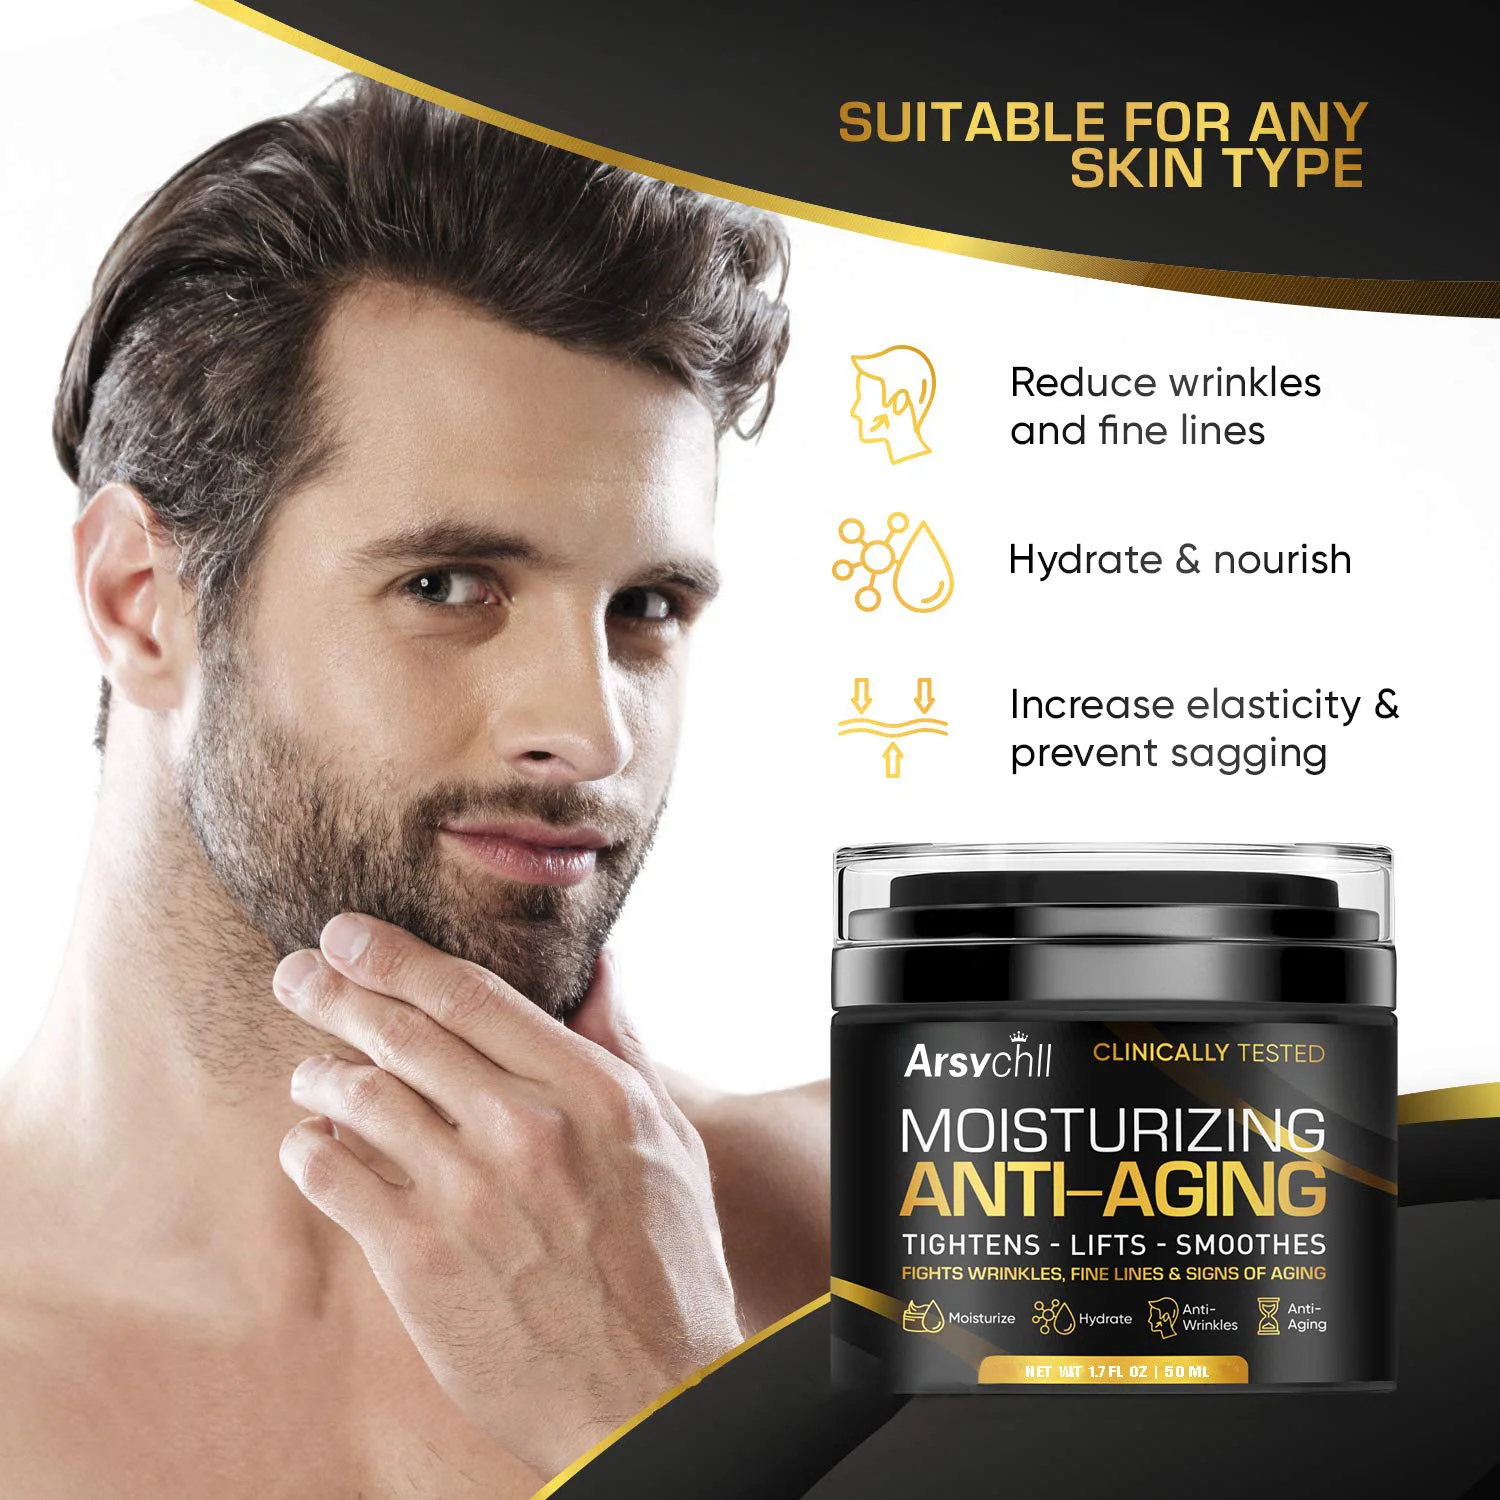 Oem/odm Cosmetics Natural Mens Anti Aging Anti Wrinkle Face Beauty Day And  Night Cream Skin Care Products For Men Private Label - Buy Day And Night  Cream,Anti Aging Skin Care,Face Cream Men